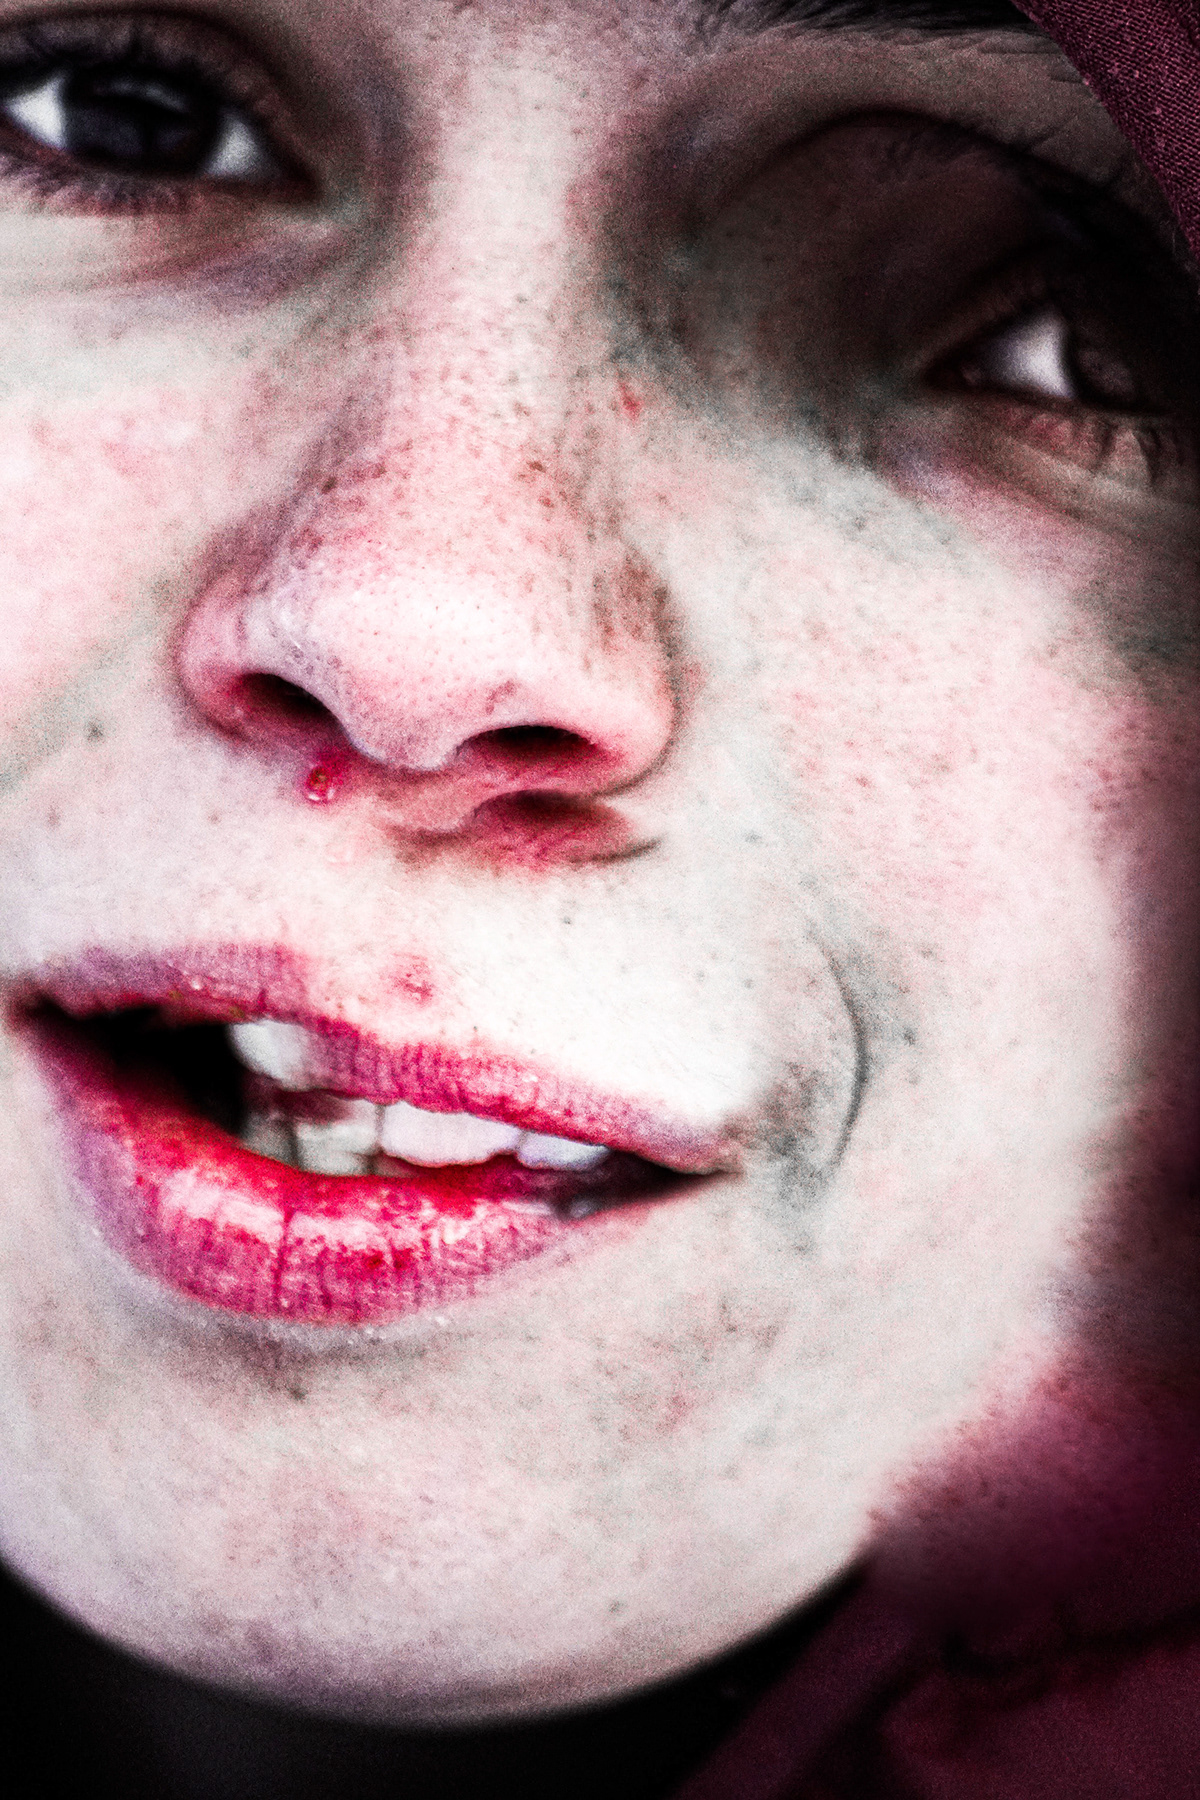 color contrast deformed Editing  face Love Photography  skin ugly